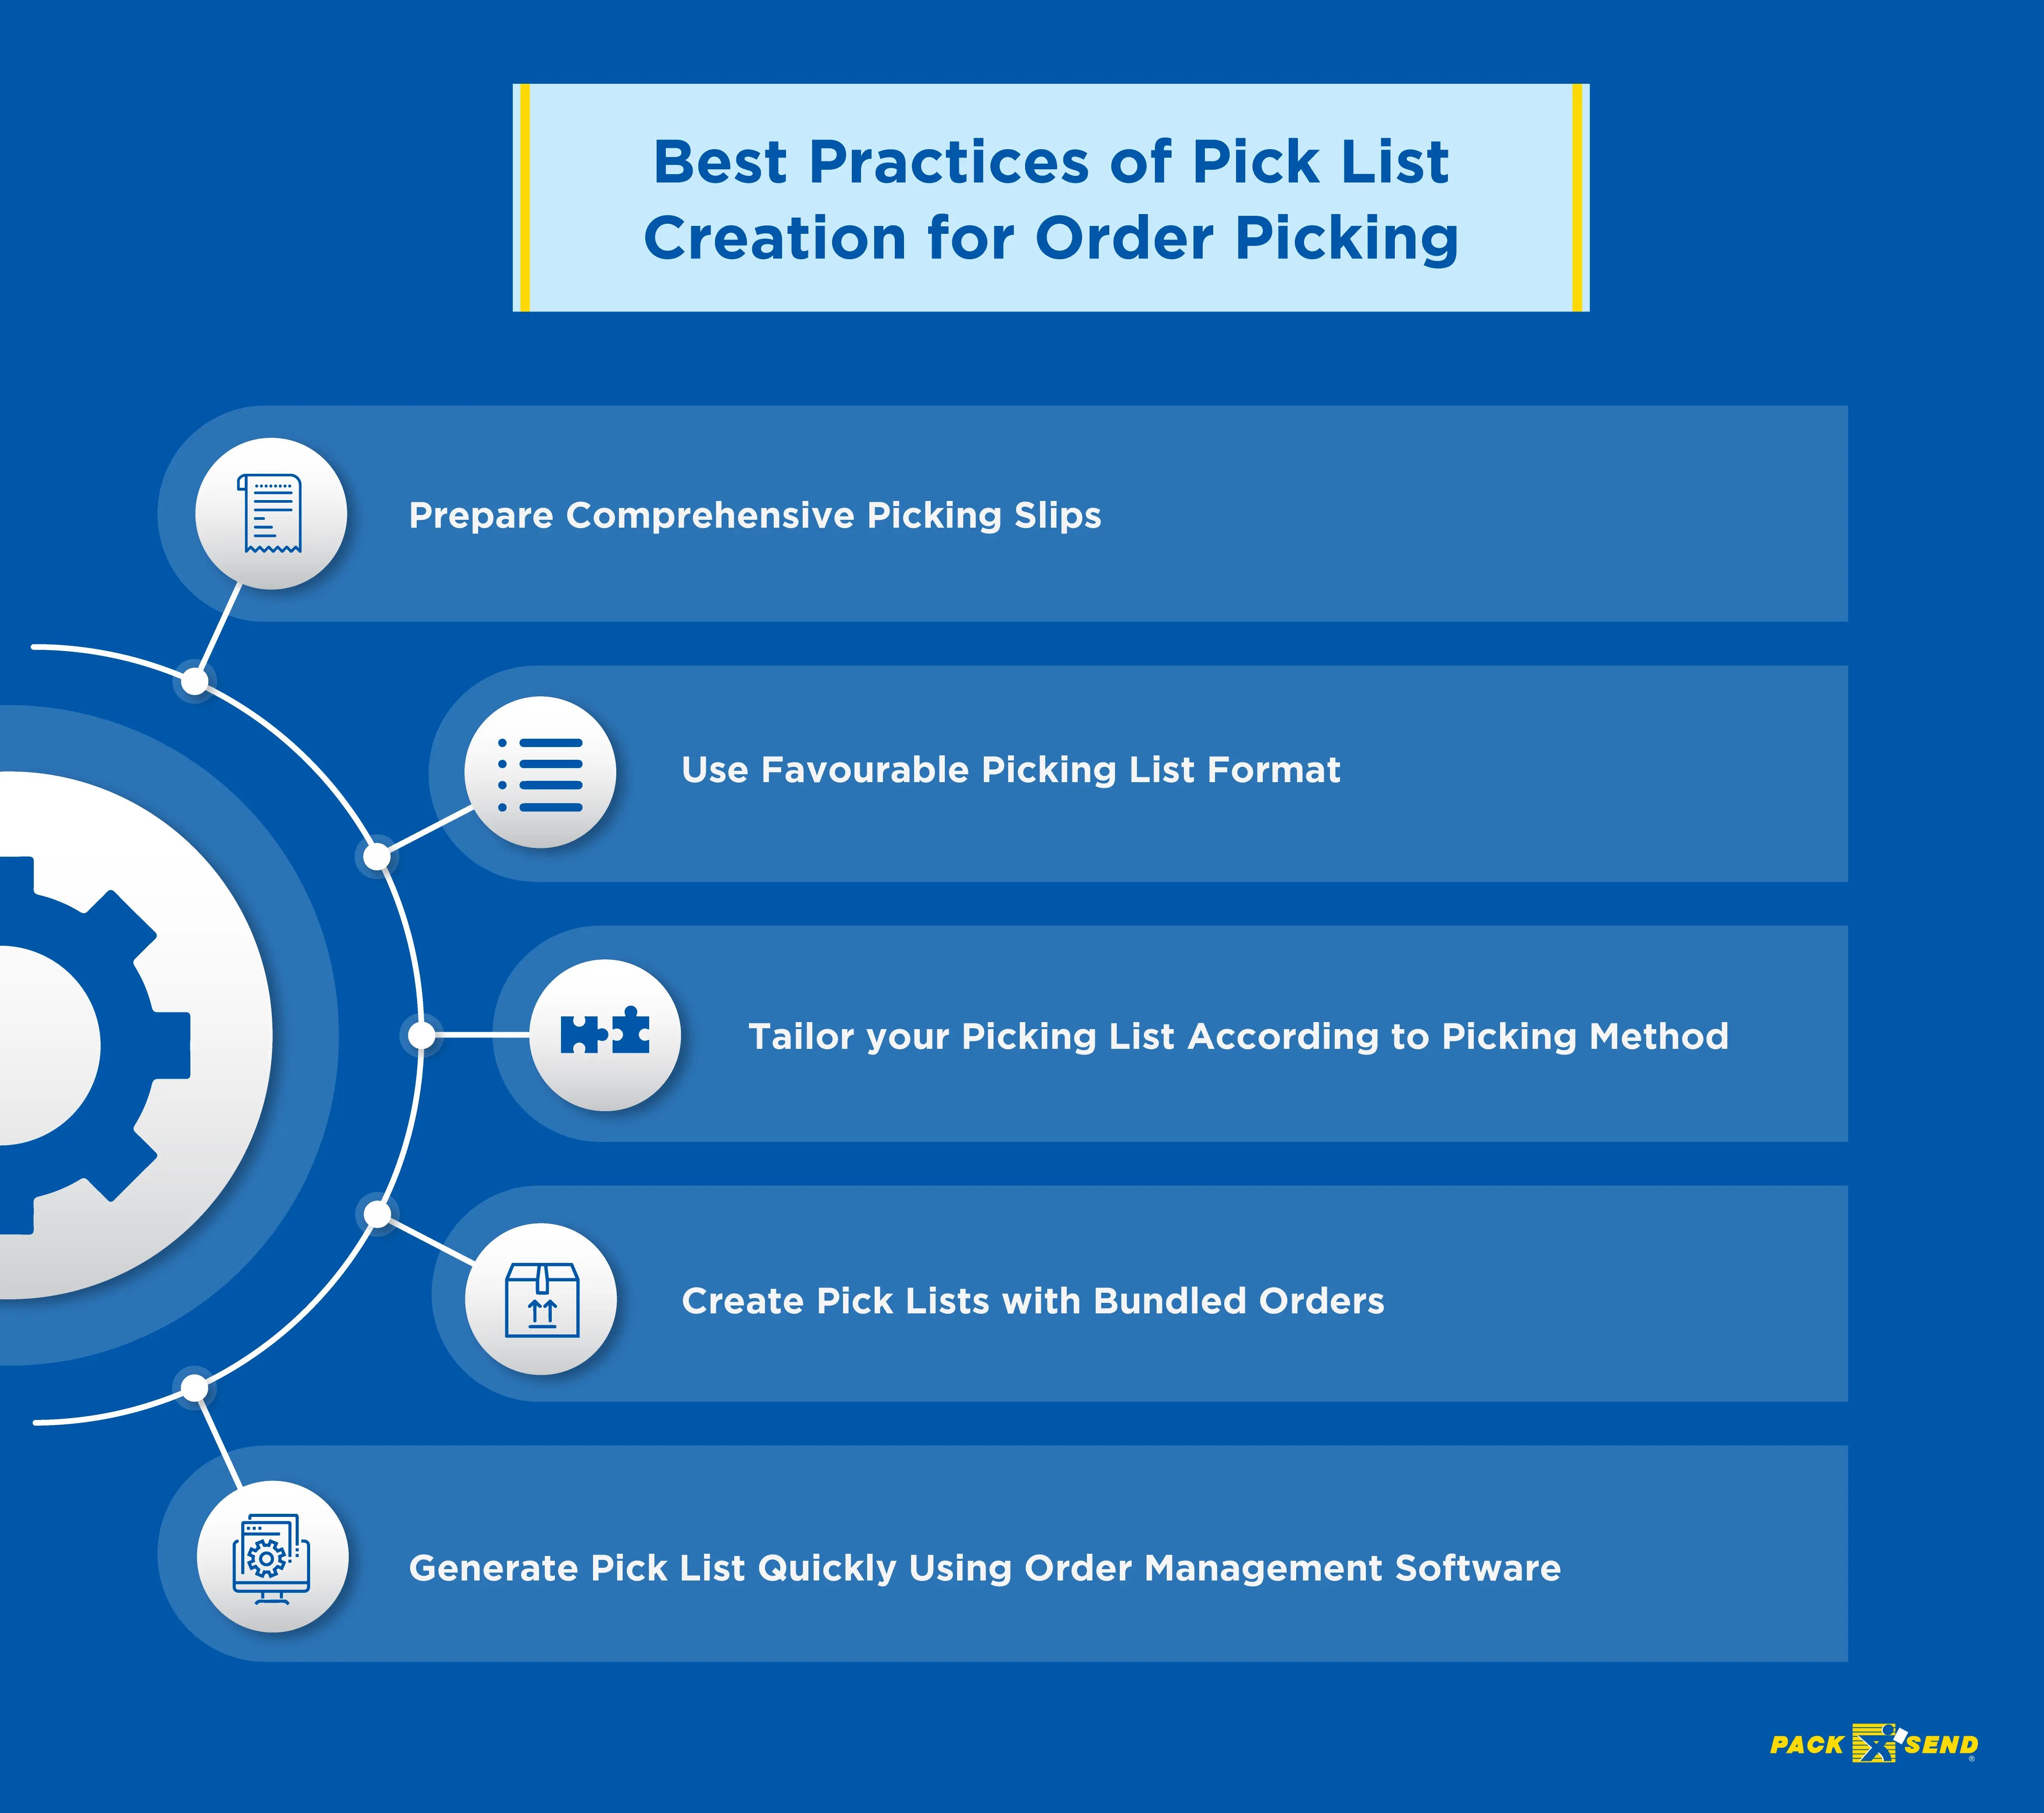 Best-Practices-of-Pick-List-Creation-for-Order-Picking